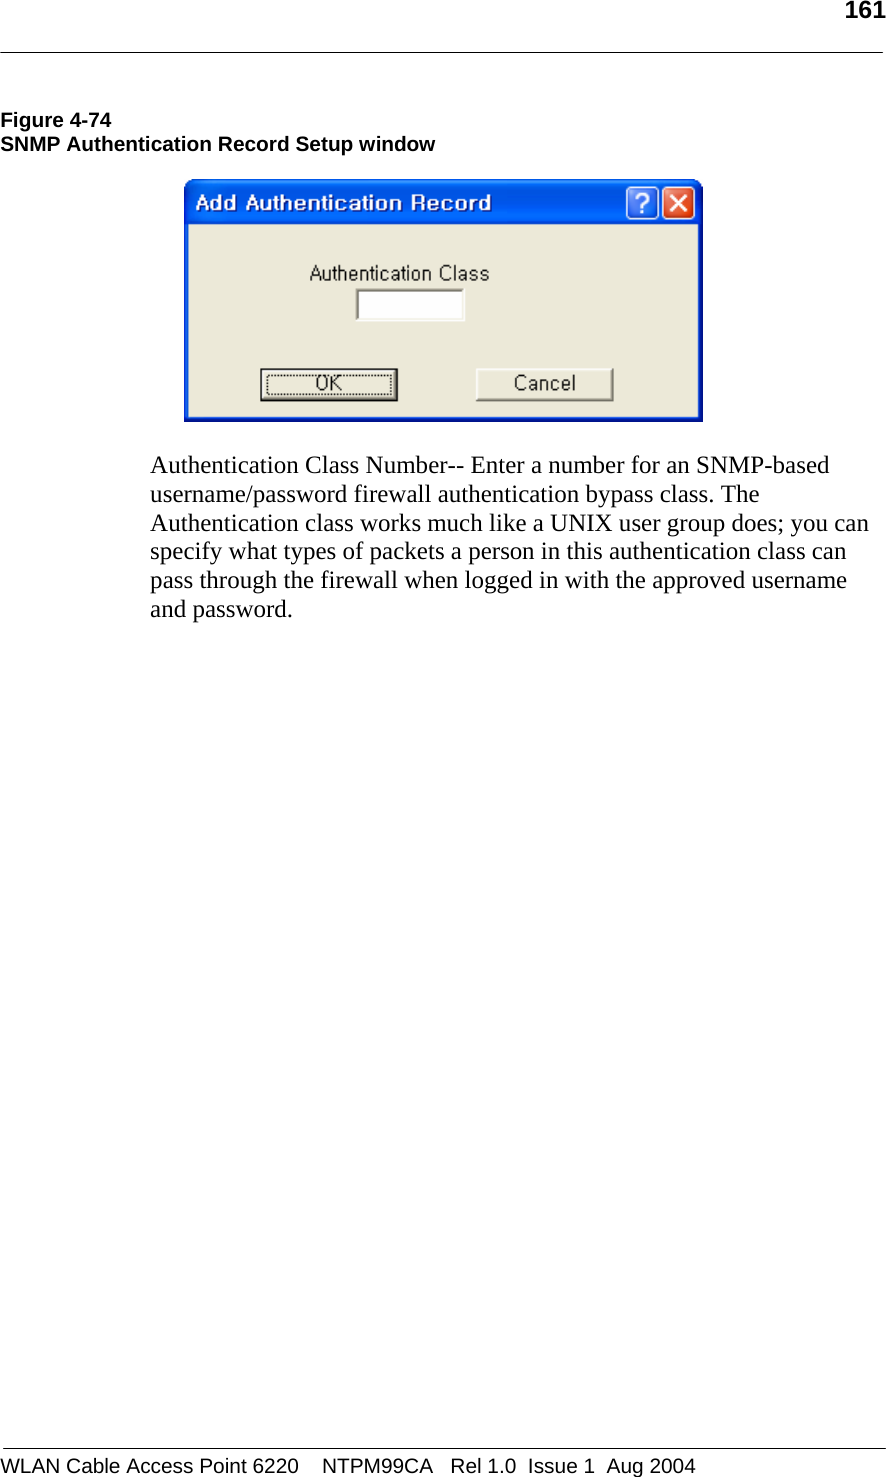   161  Figure 4-74 SNMP Authentication Record Setup window    Authentication Class Number-- Enter a number for an SNMP-based username/password firewall authentication bypass class. The Authentication class works much like a UNIX user group does; you can specify what types of packets a person in this authentication class can pass through the firewall when logged in with the approved username and password.   WLAN Cable Access Point 6220    NTPM99CA   Rel 1.0  Issue 1  Aug 2004 